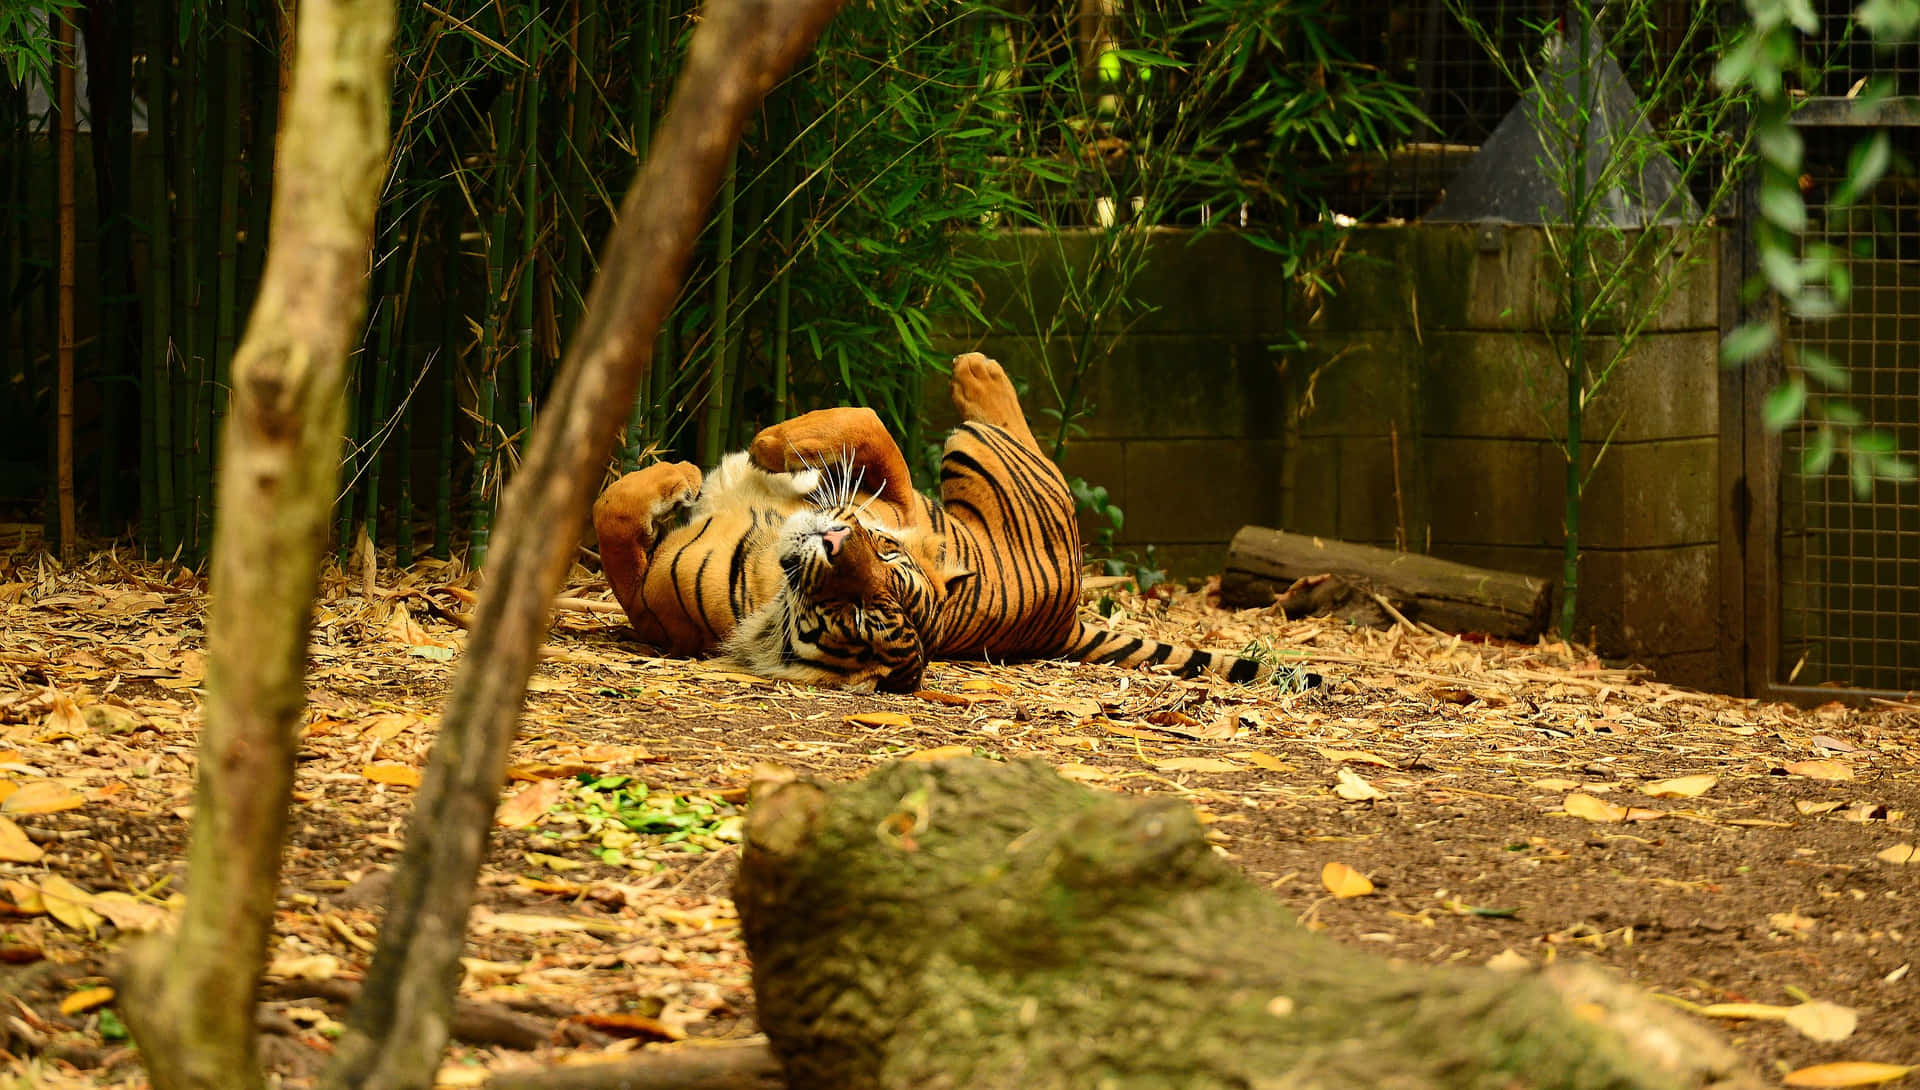 Relaxed Tiger Melbourne Zoo Wallpaper